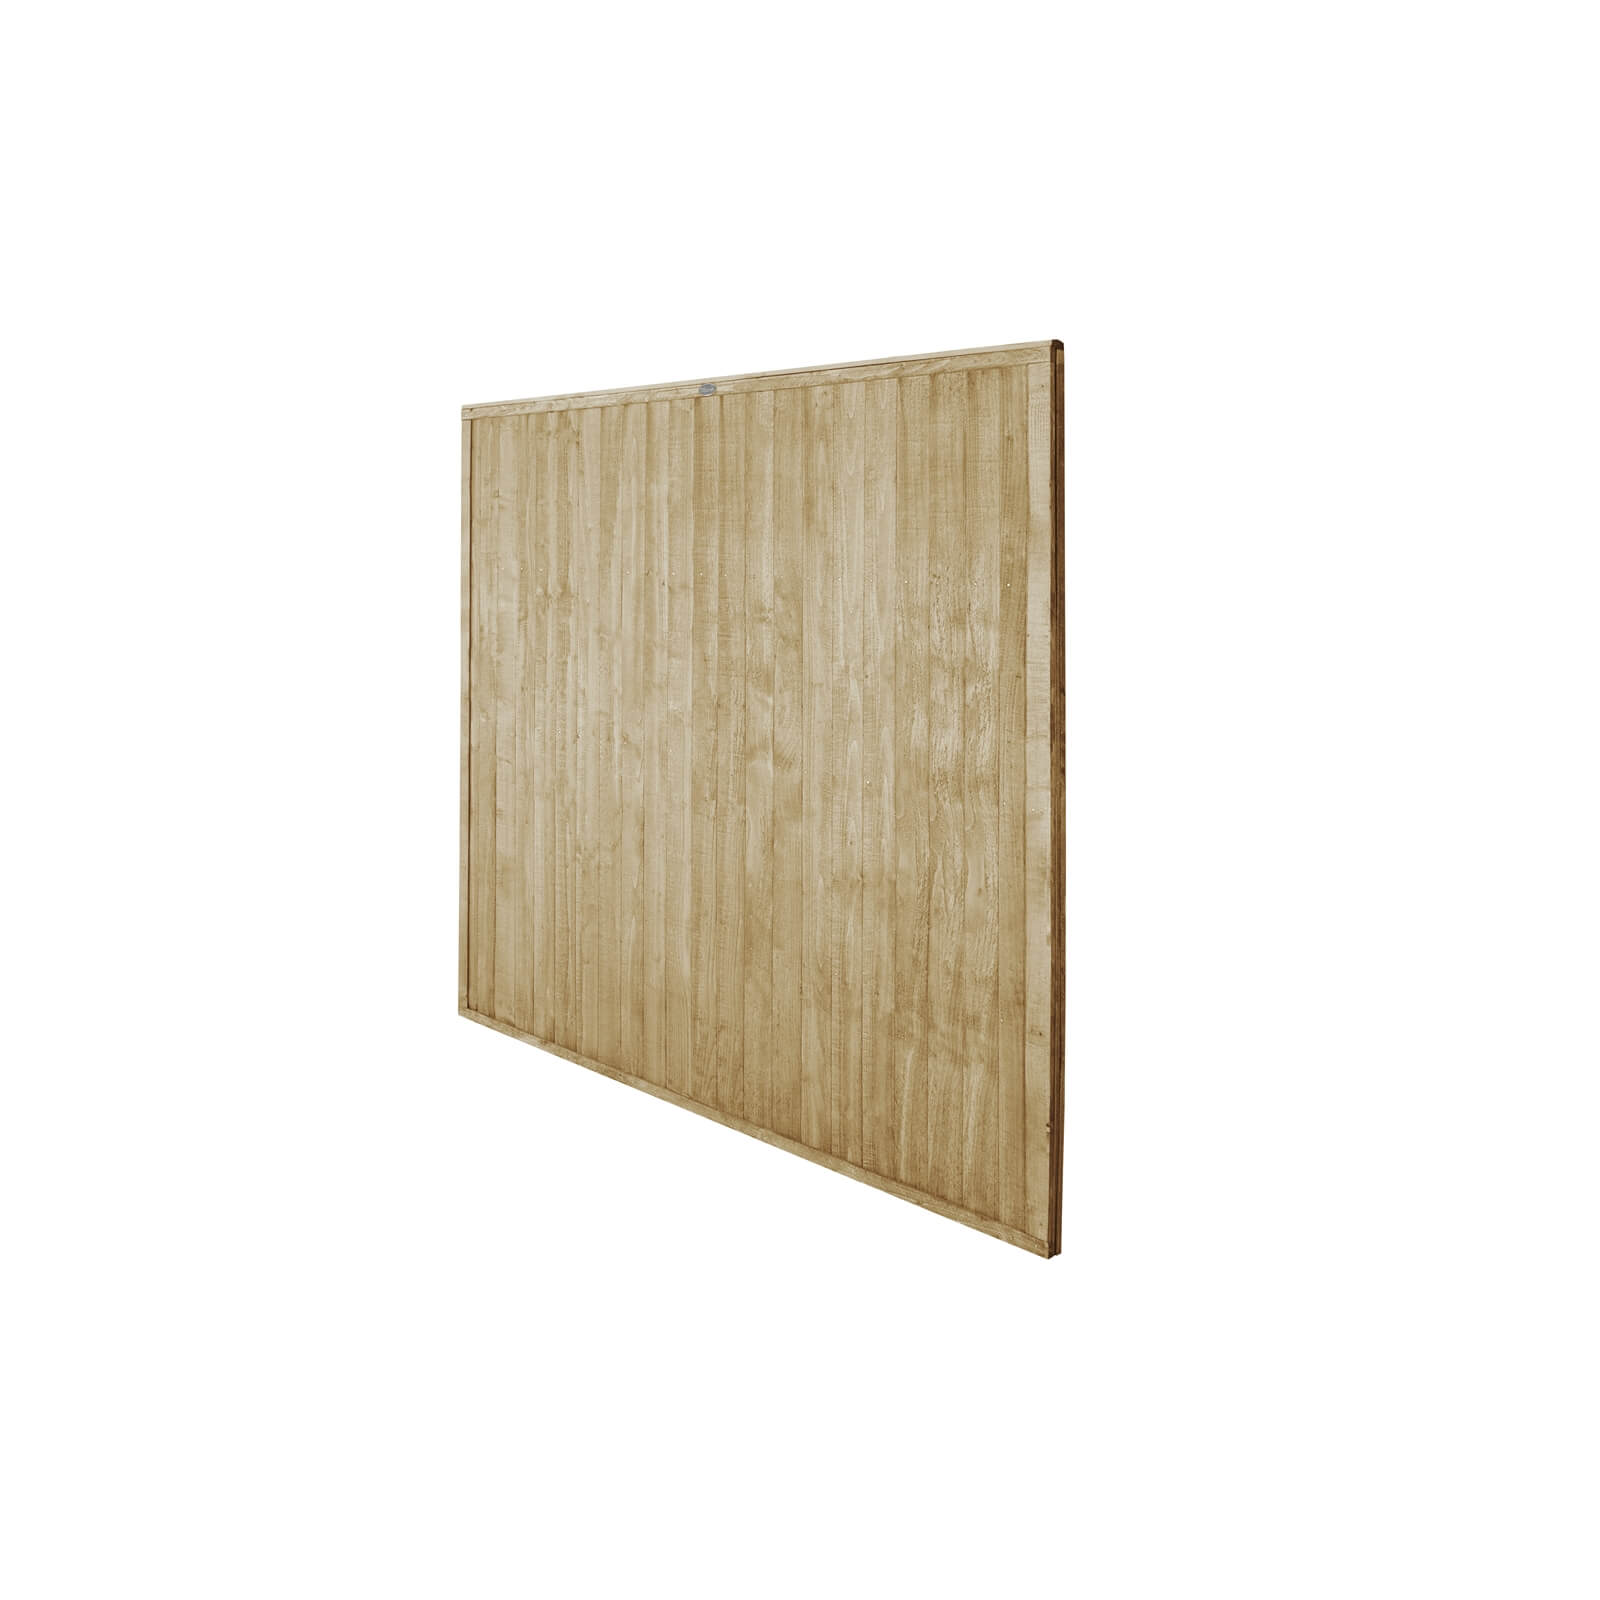 Photo of 6ft X 6ft -1.83m X 1.83m- Pressure Treated Closeboard Fence Panel - Pack Of 20